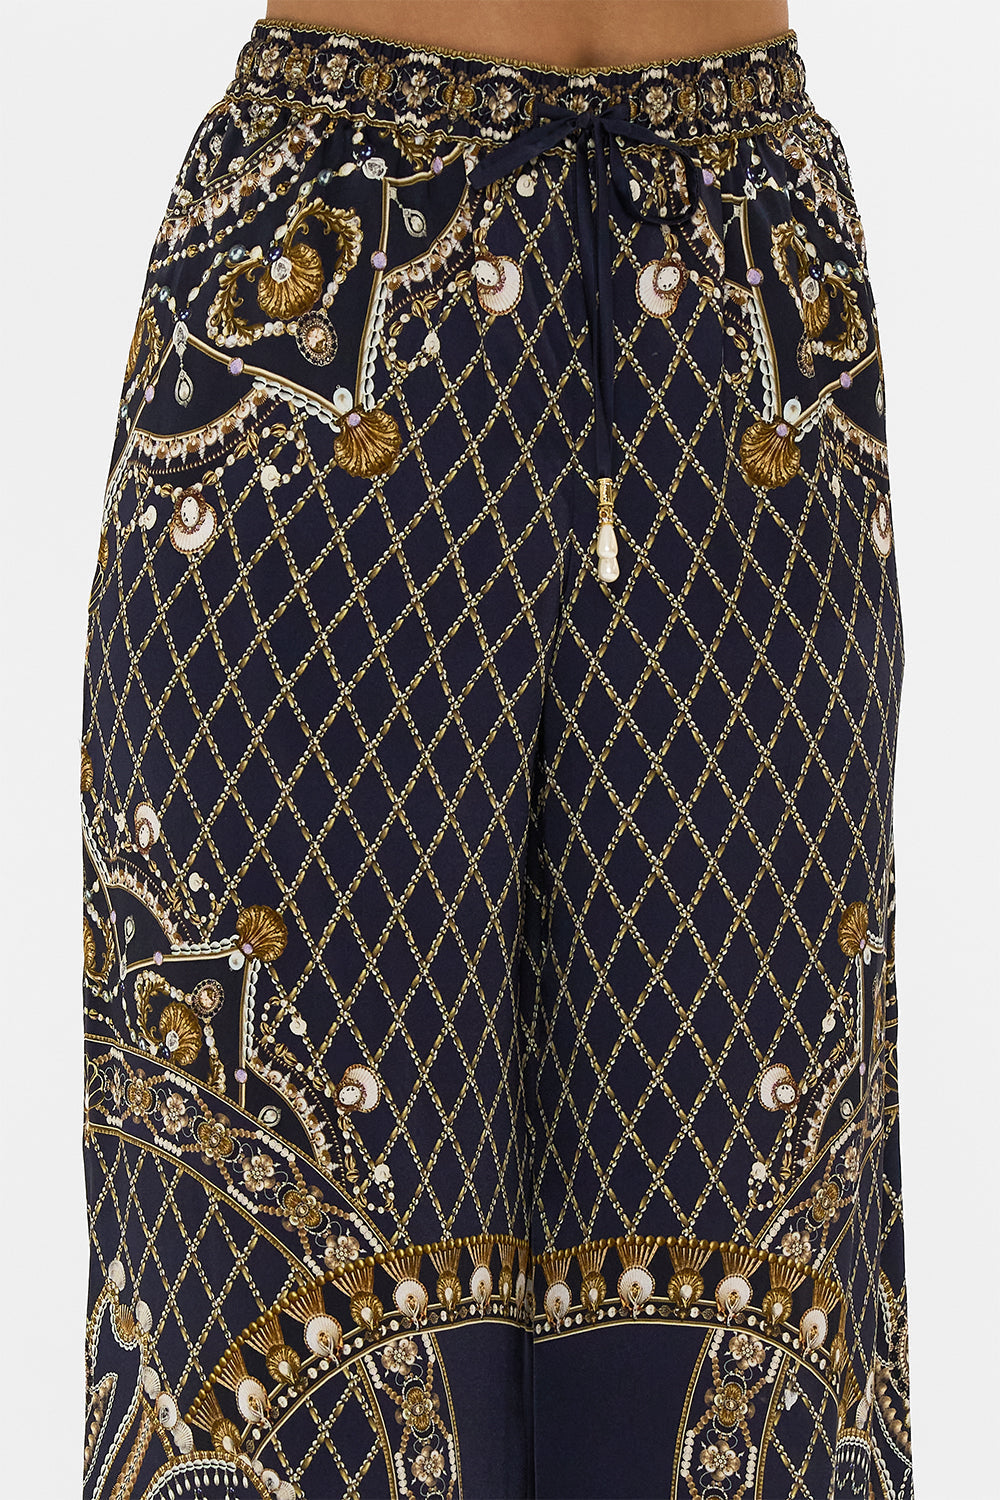 CAMILLA Gold Lounge Pant in Dance with the Duke print